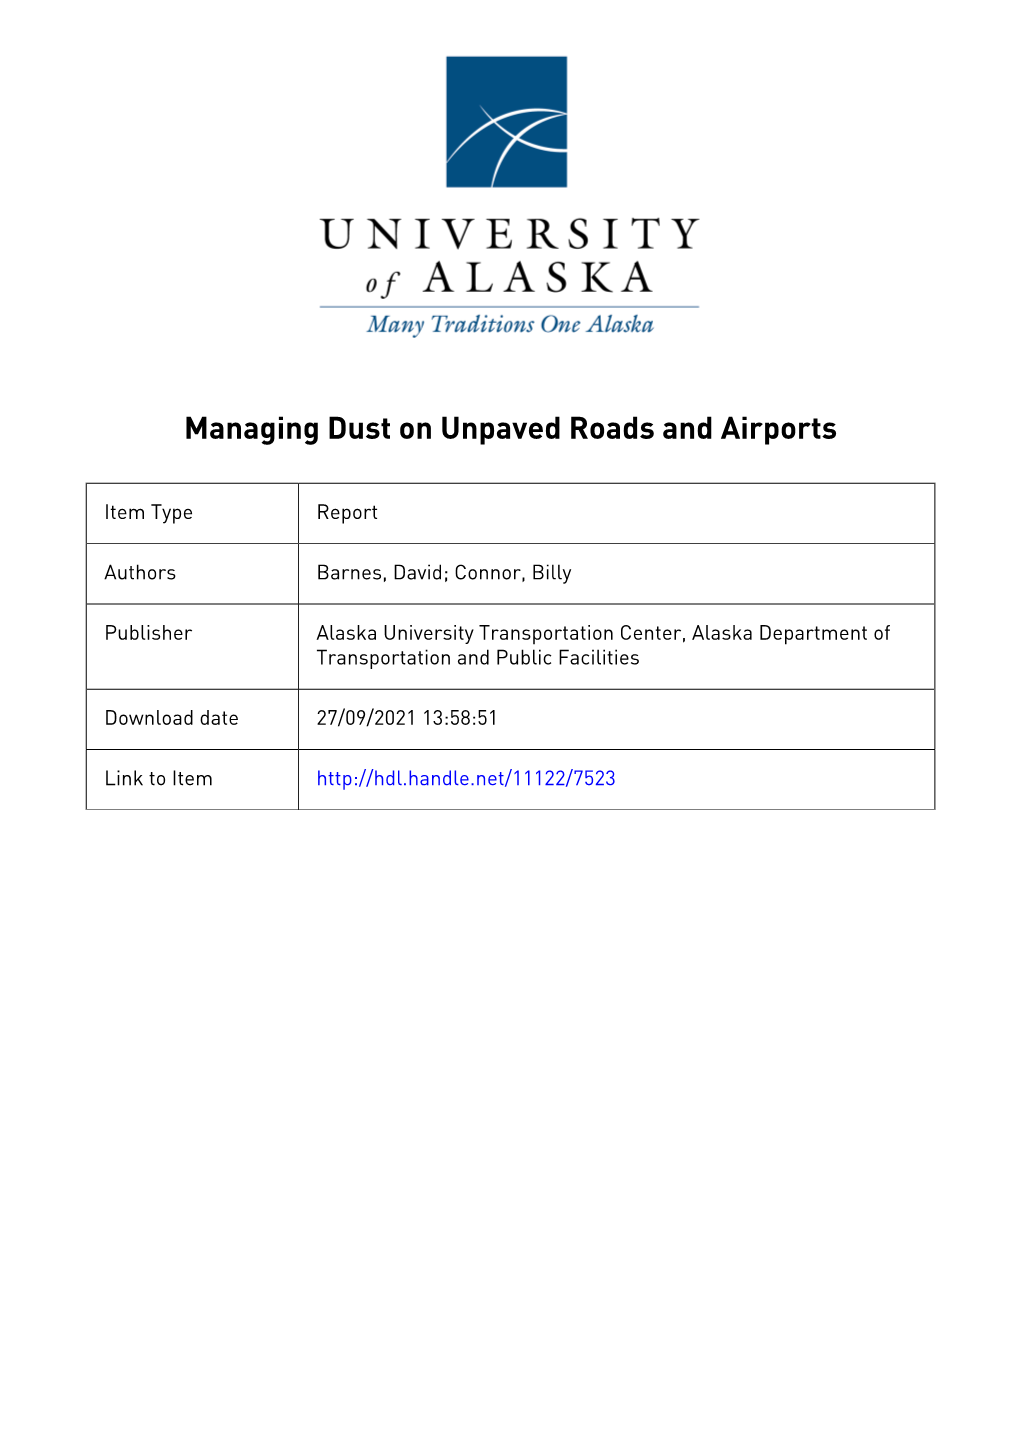 Managing Dust on Unpaved Roads and Airports